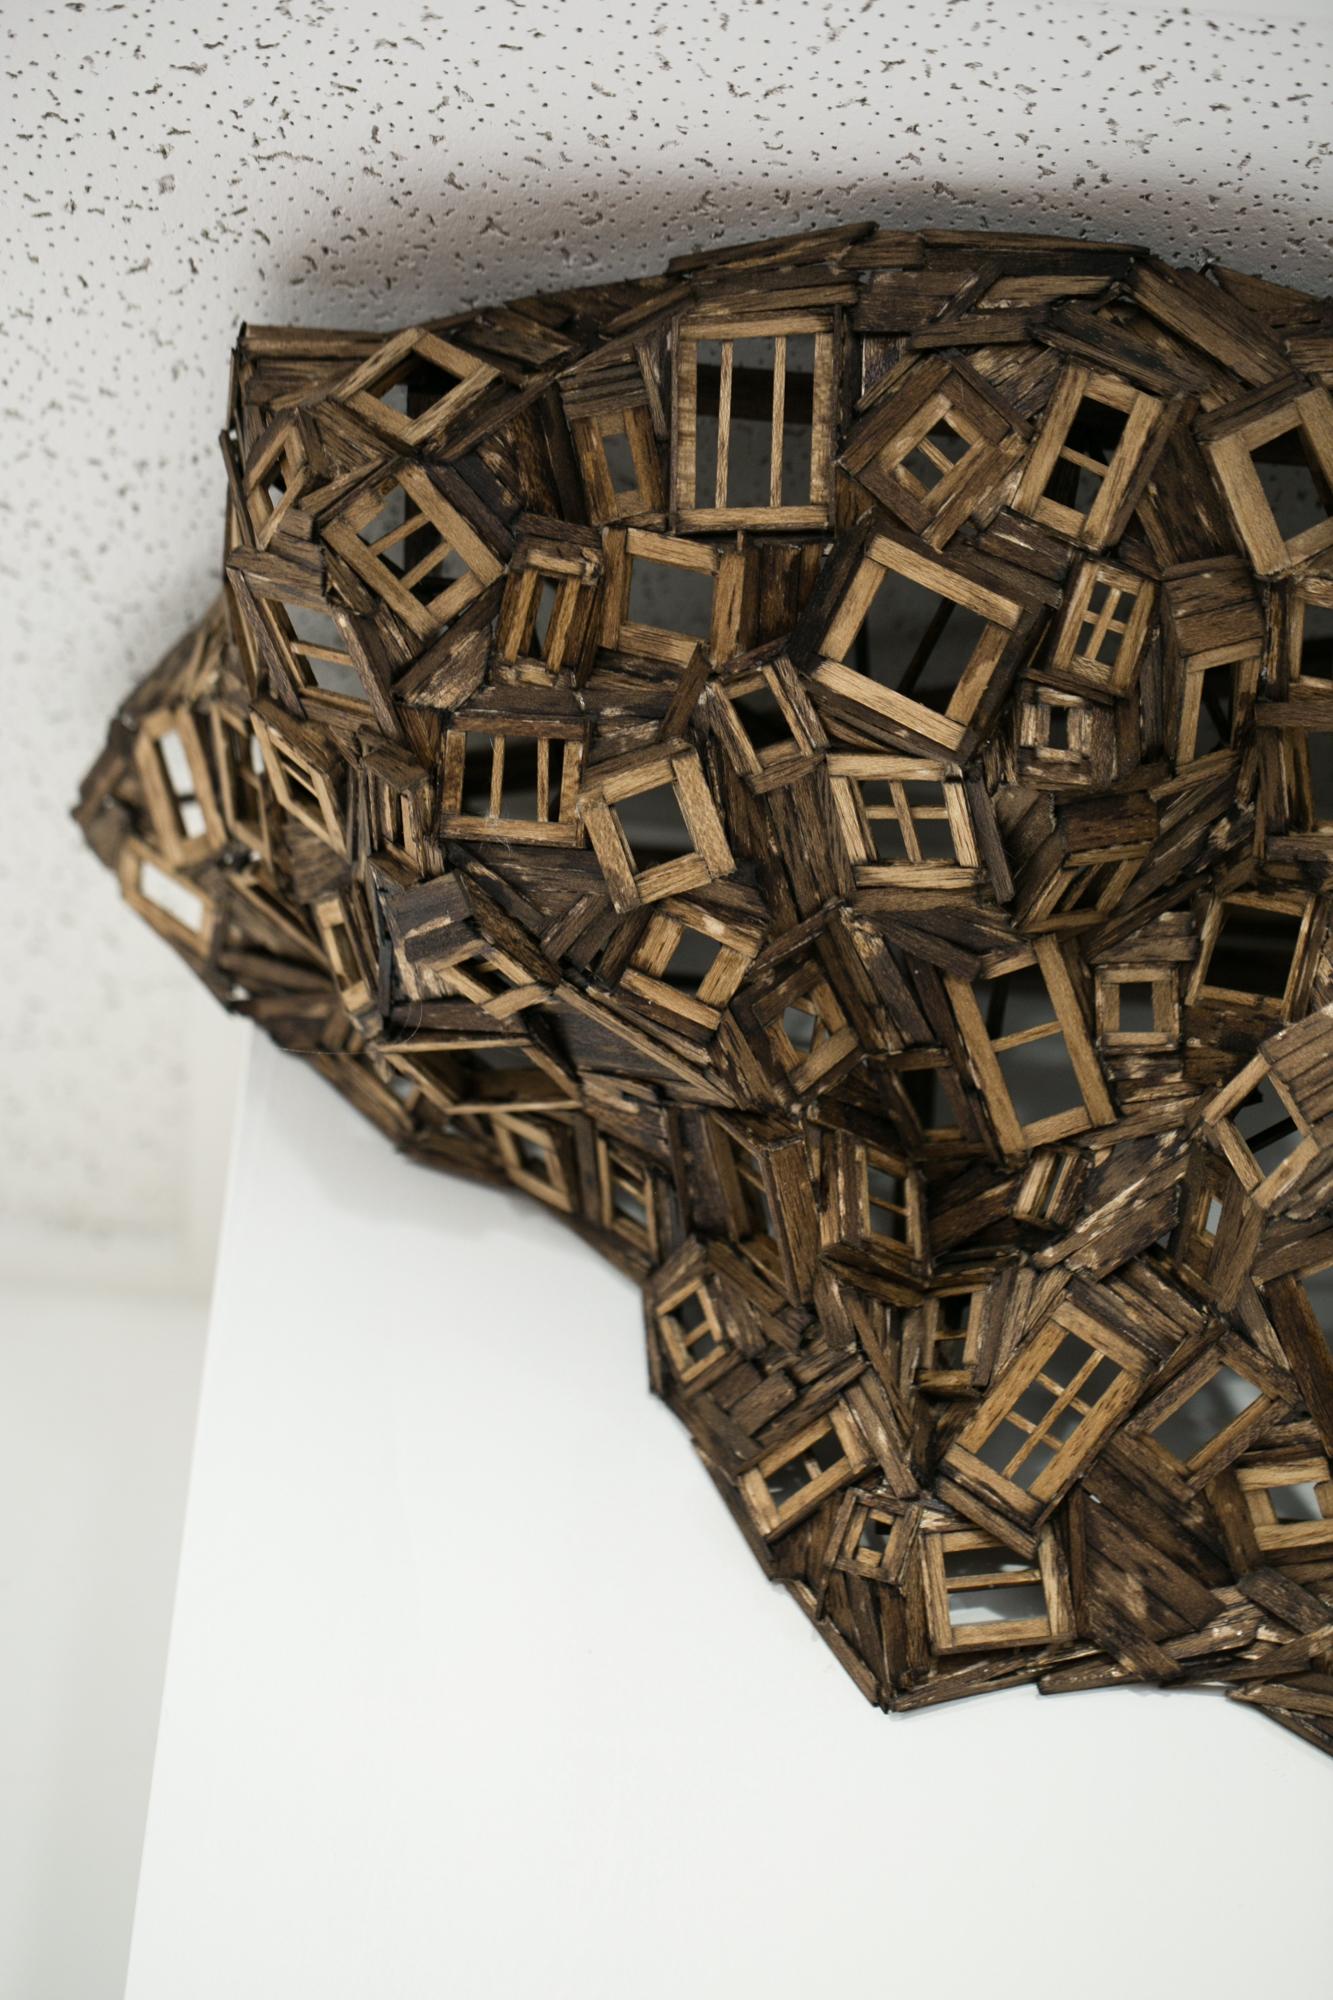 Hive IV - Contemporary Art by Seth Clark